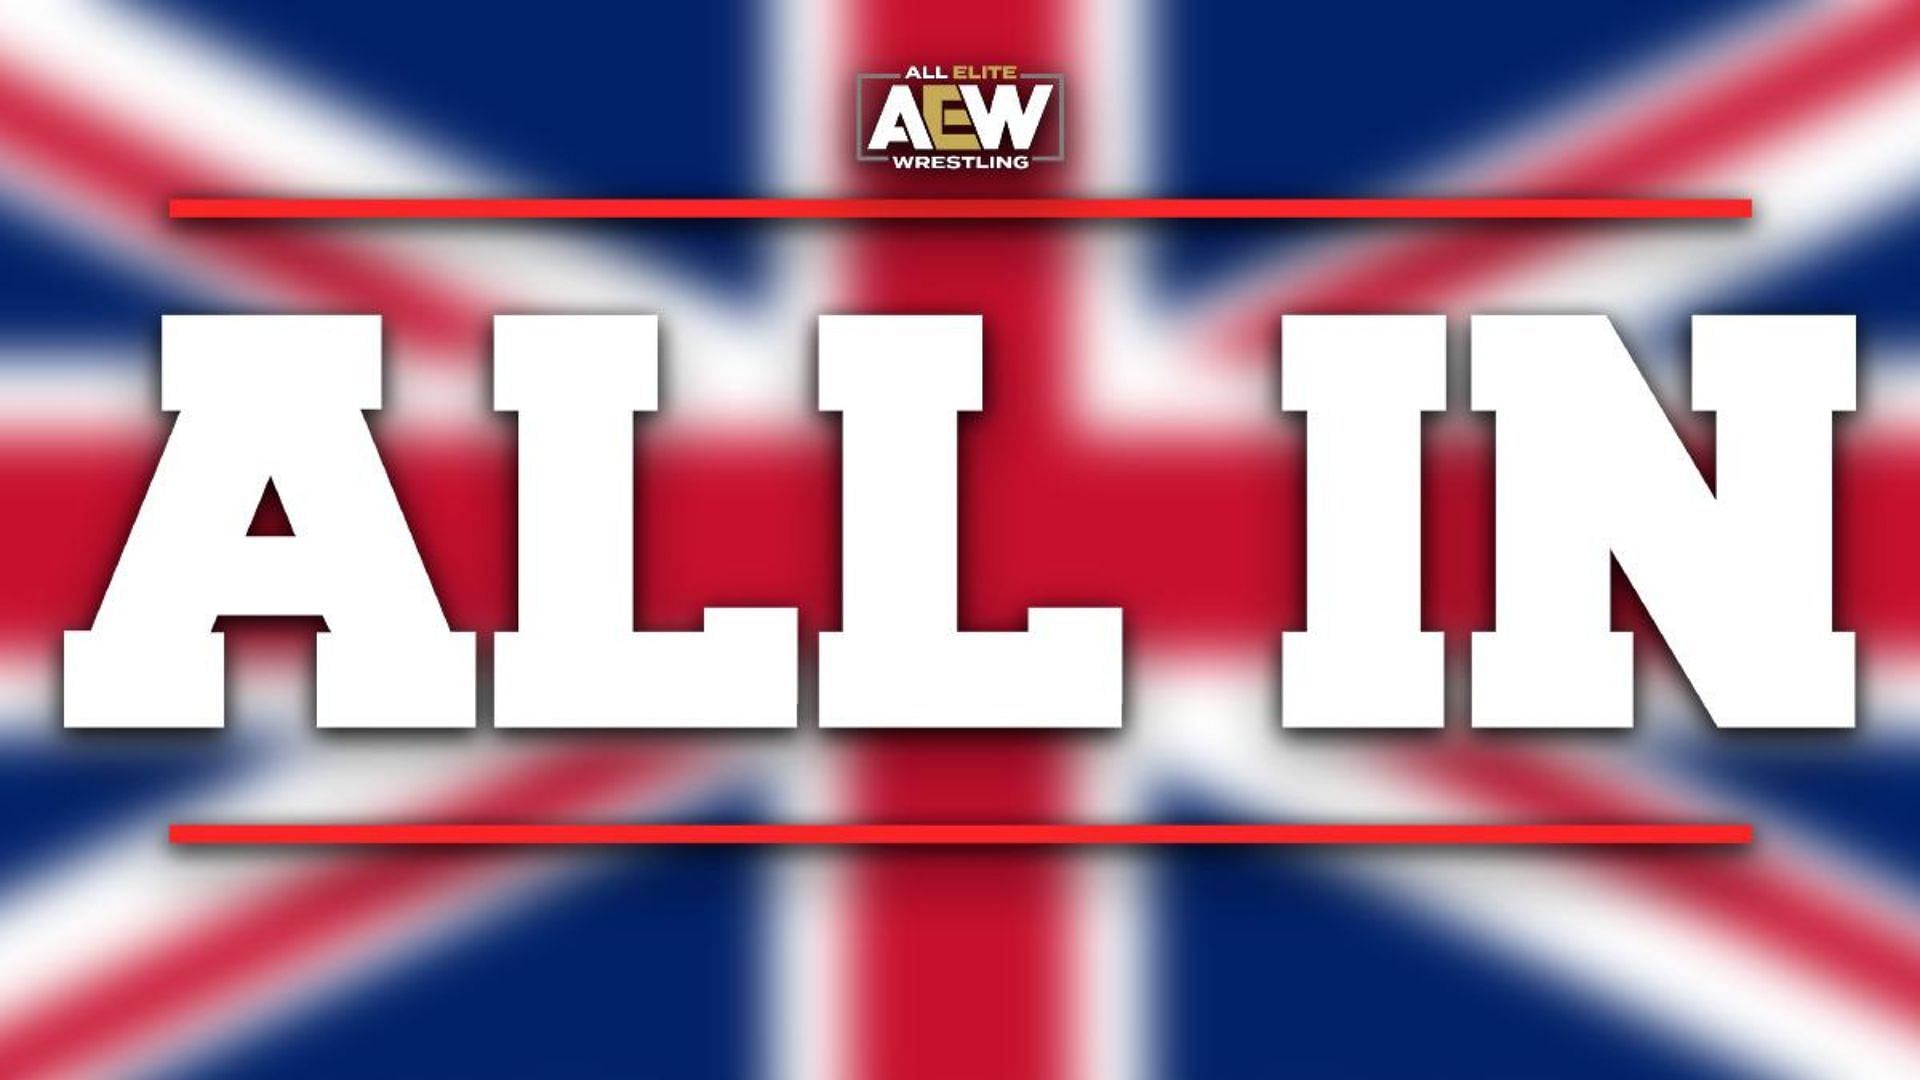 AEW are set to host their biggest PPV All In next week